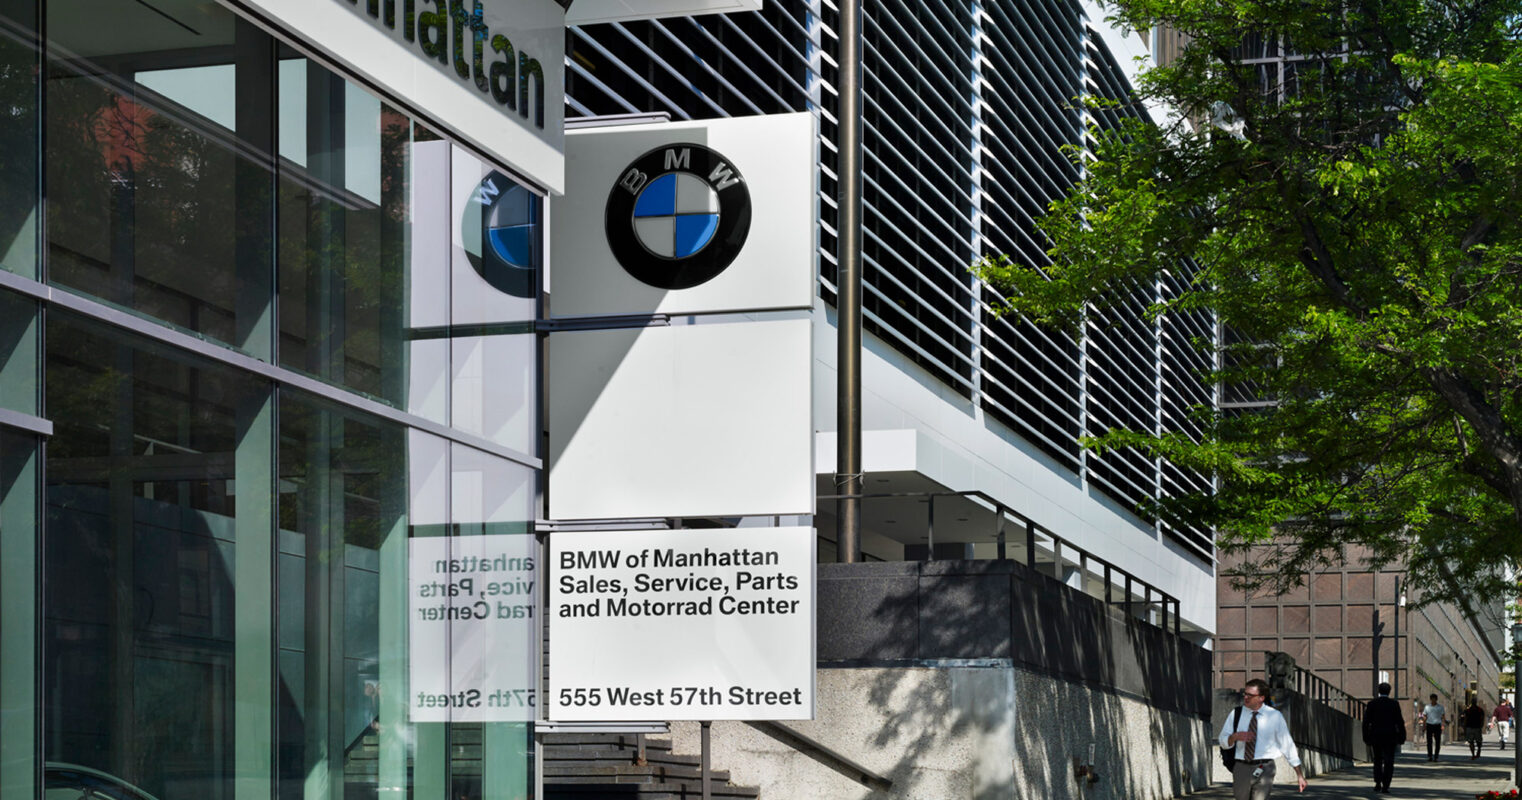 Exterior view of BMW of Manhattan building showcasing modern architecture with white angled louvers, large windows, and prominent signage, nestled in an urban setting.